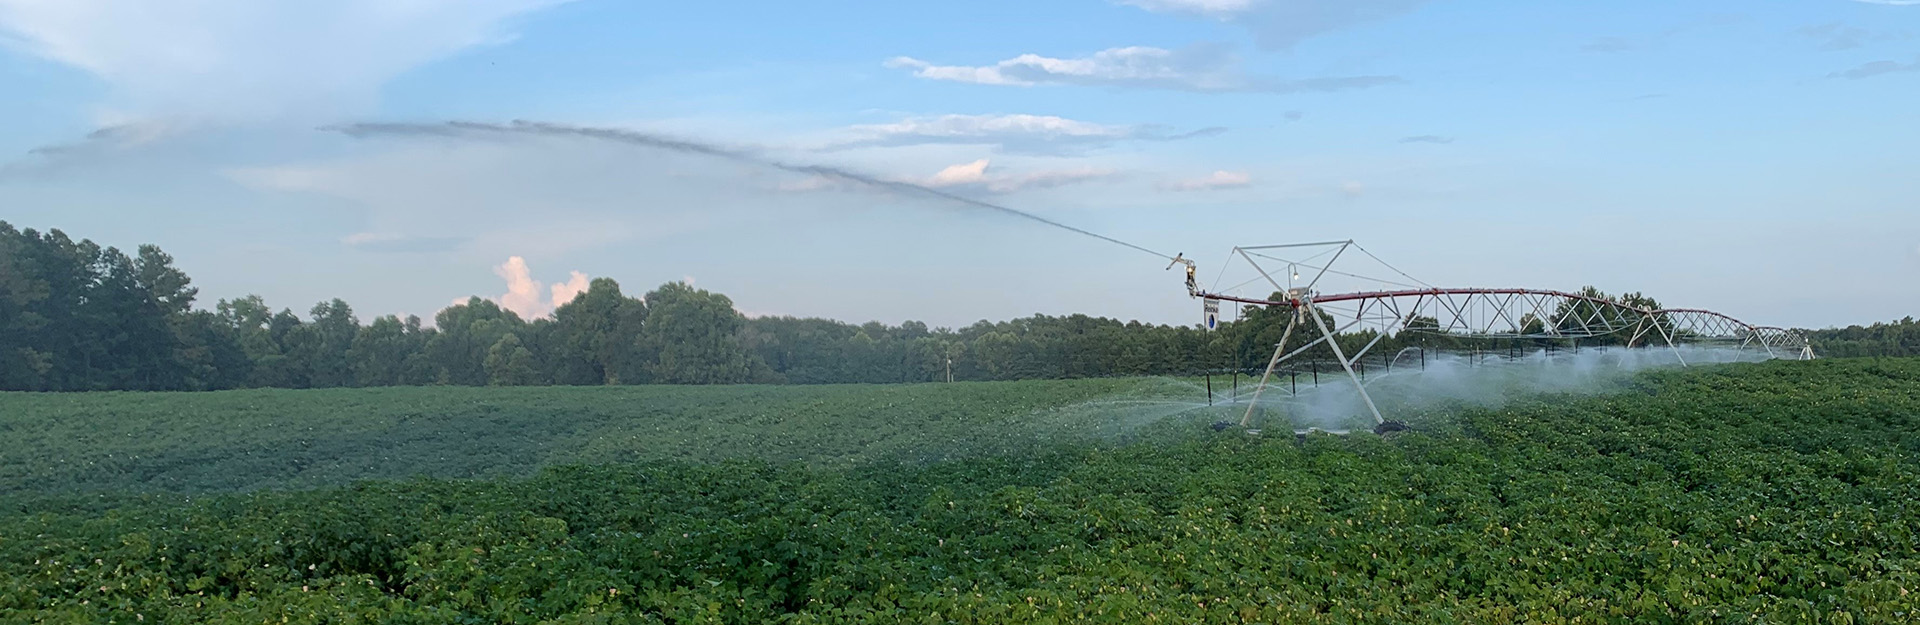 center pivot agricultural irrigation system in use